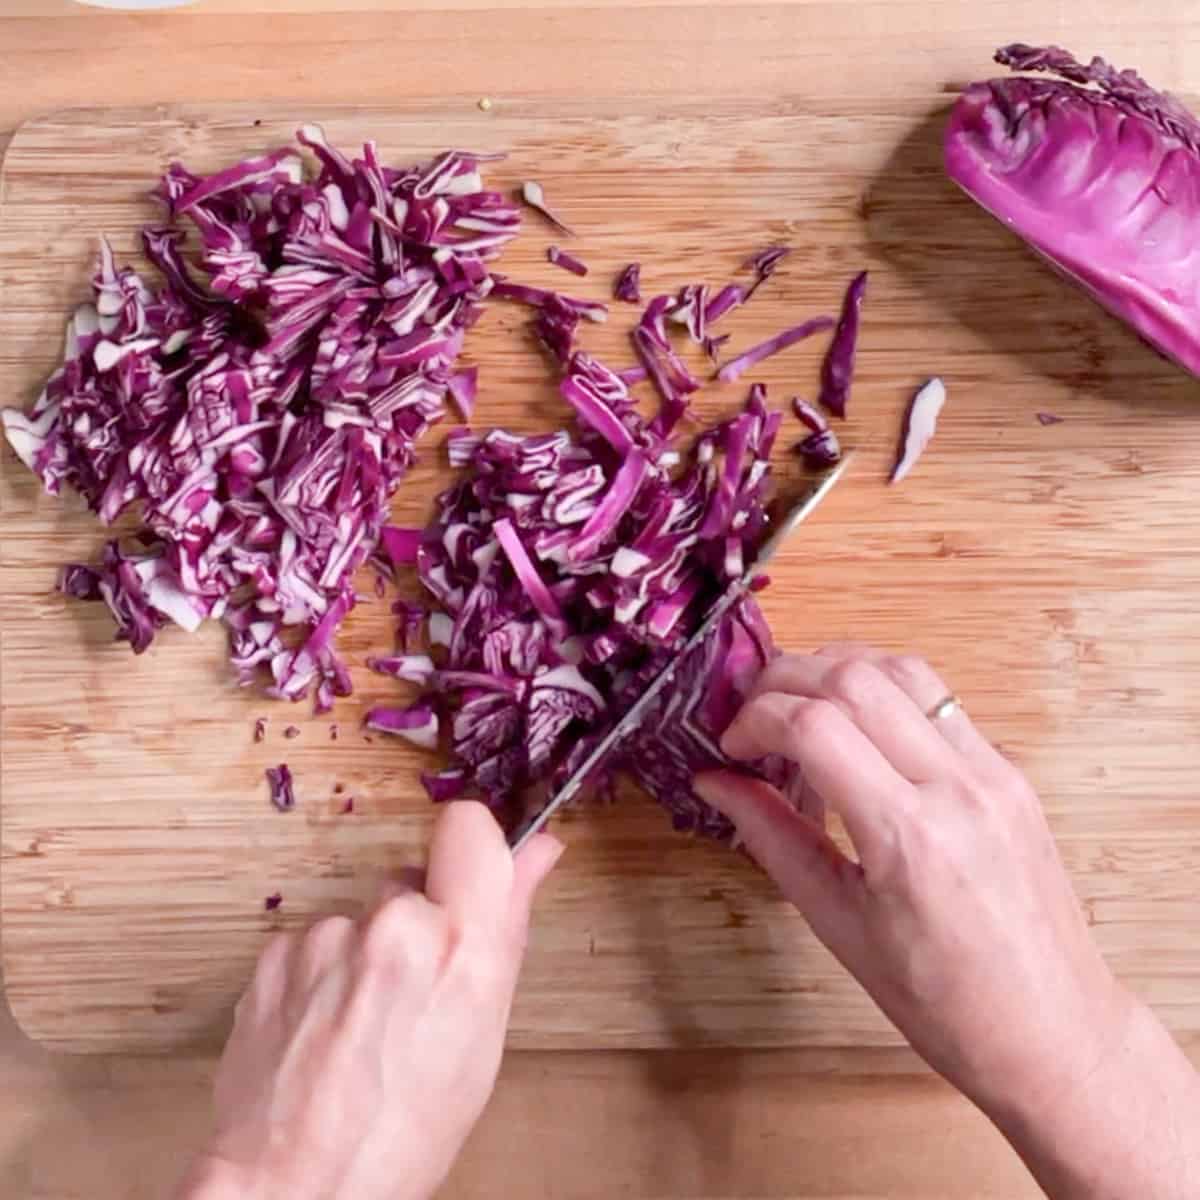 slicing red cabbage with a chef's knife..